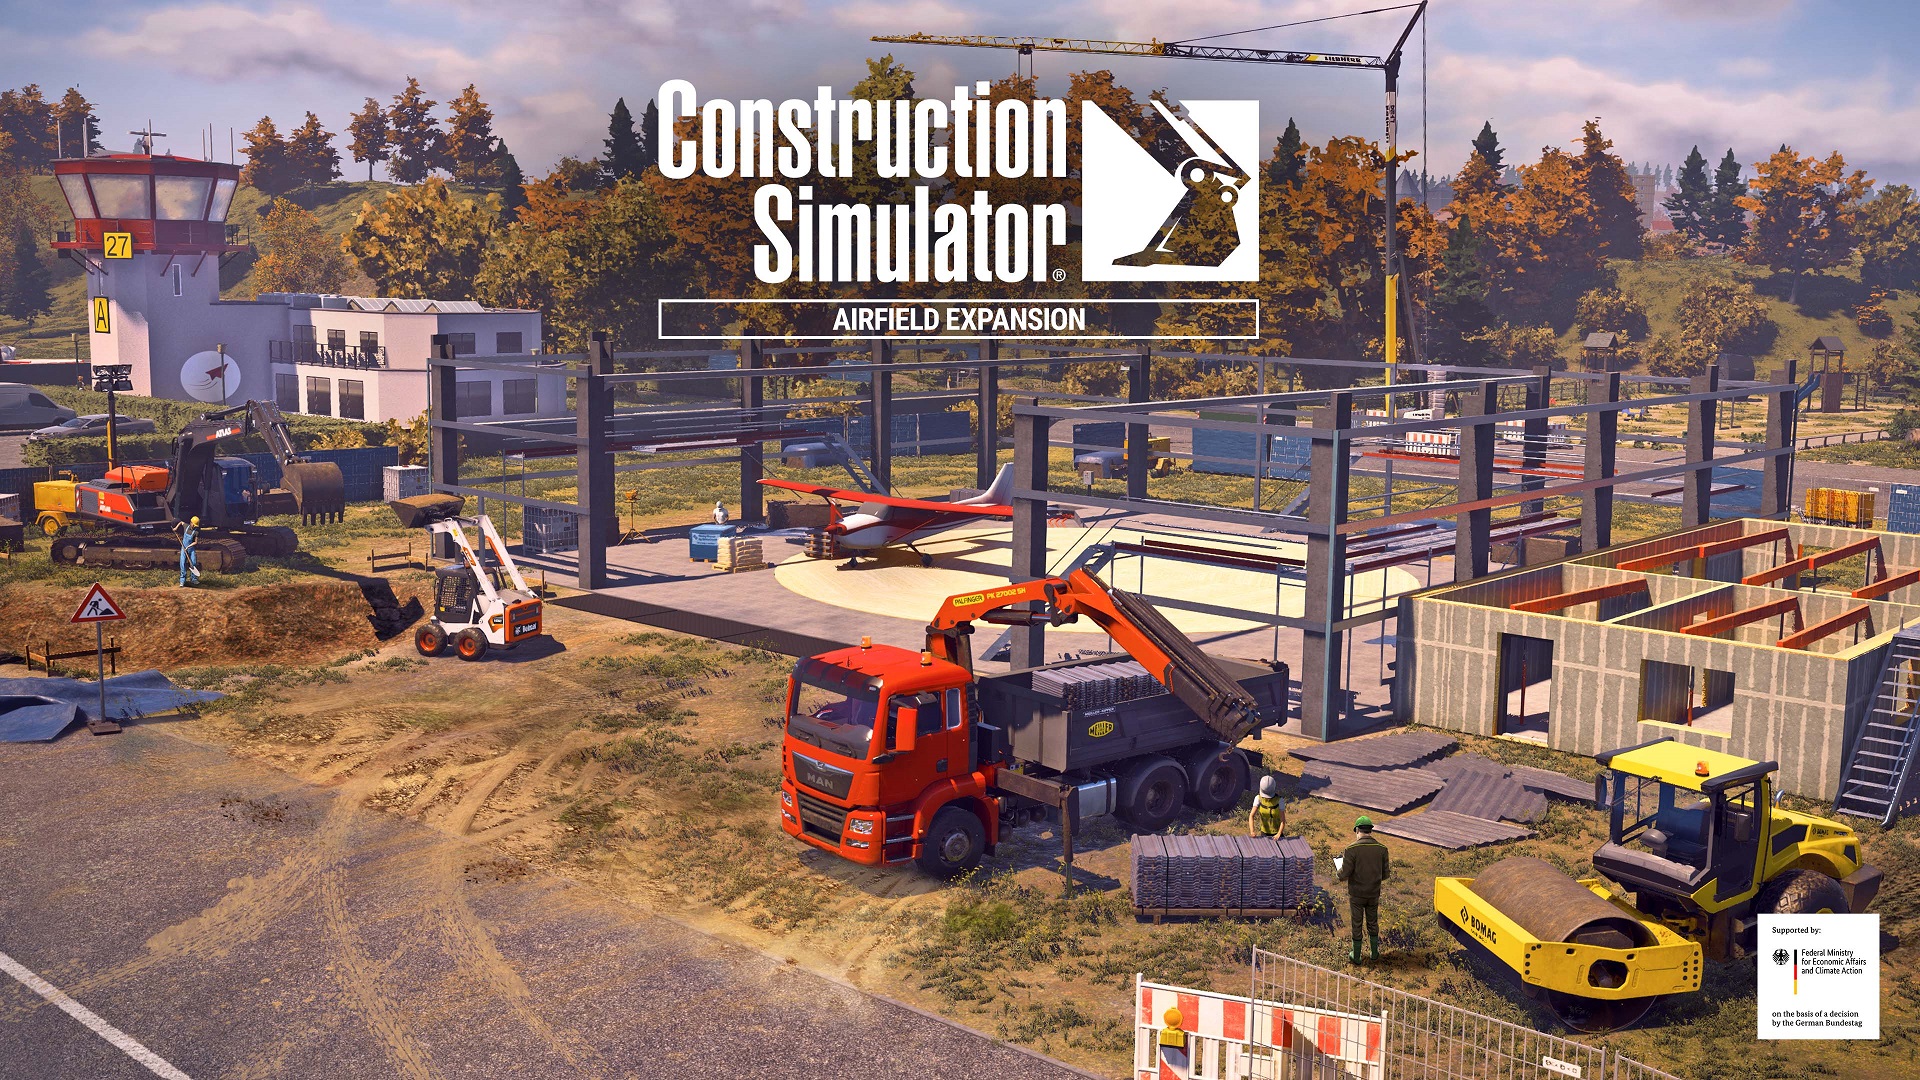 Review: Construction Simulator – Airfield Expansion